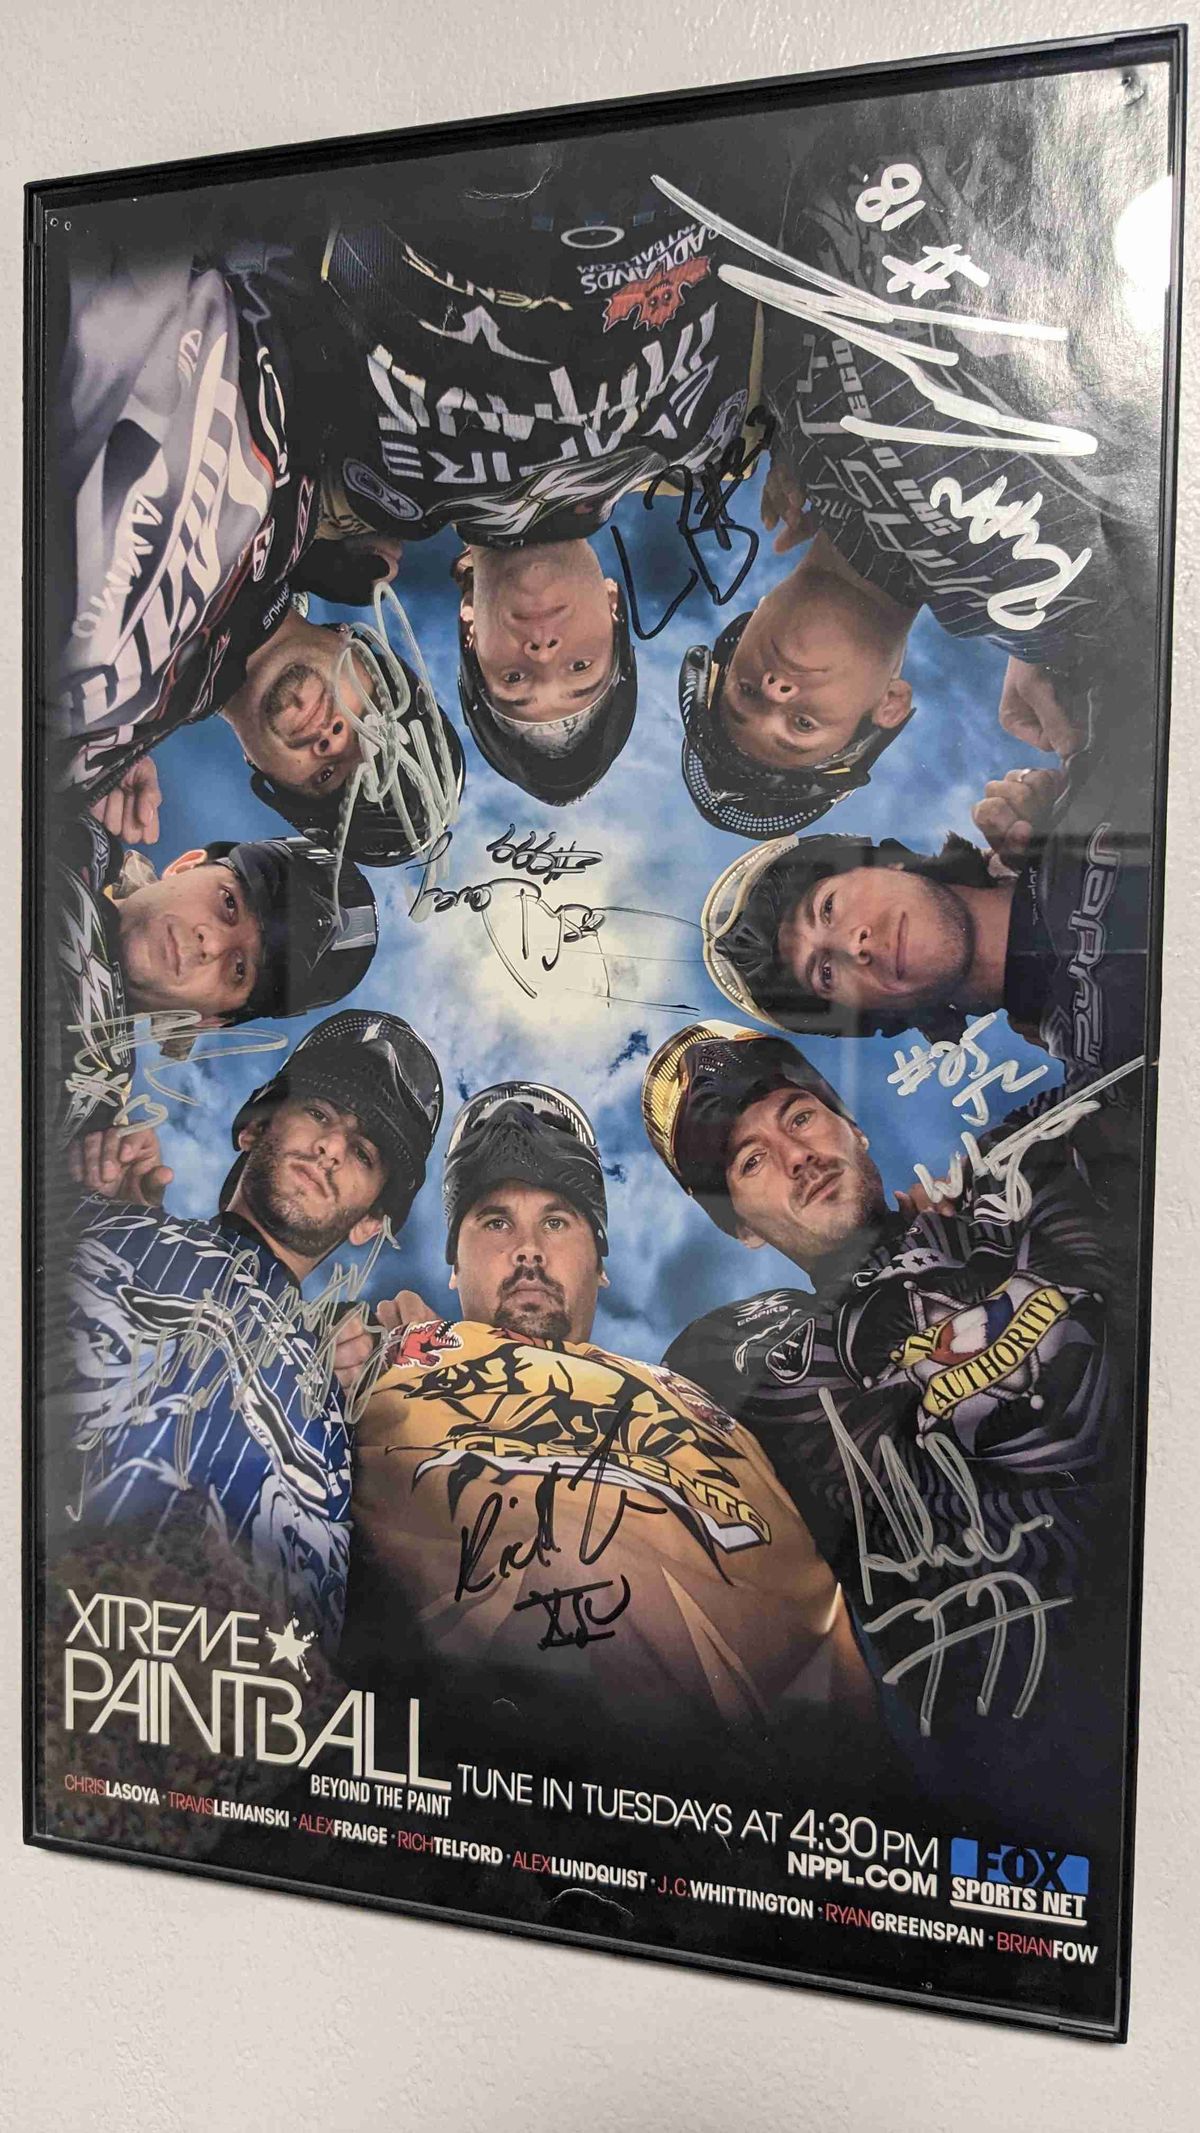 Xtreme Paintball Fox Show Signed Poster